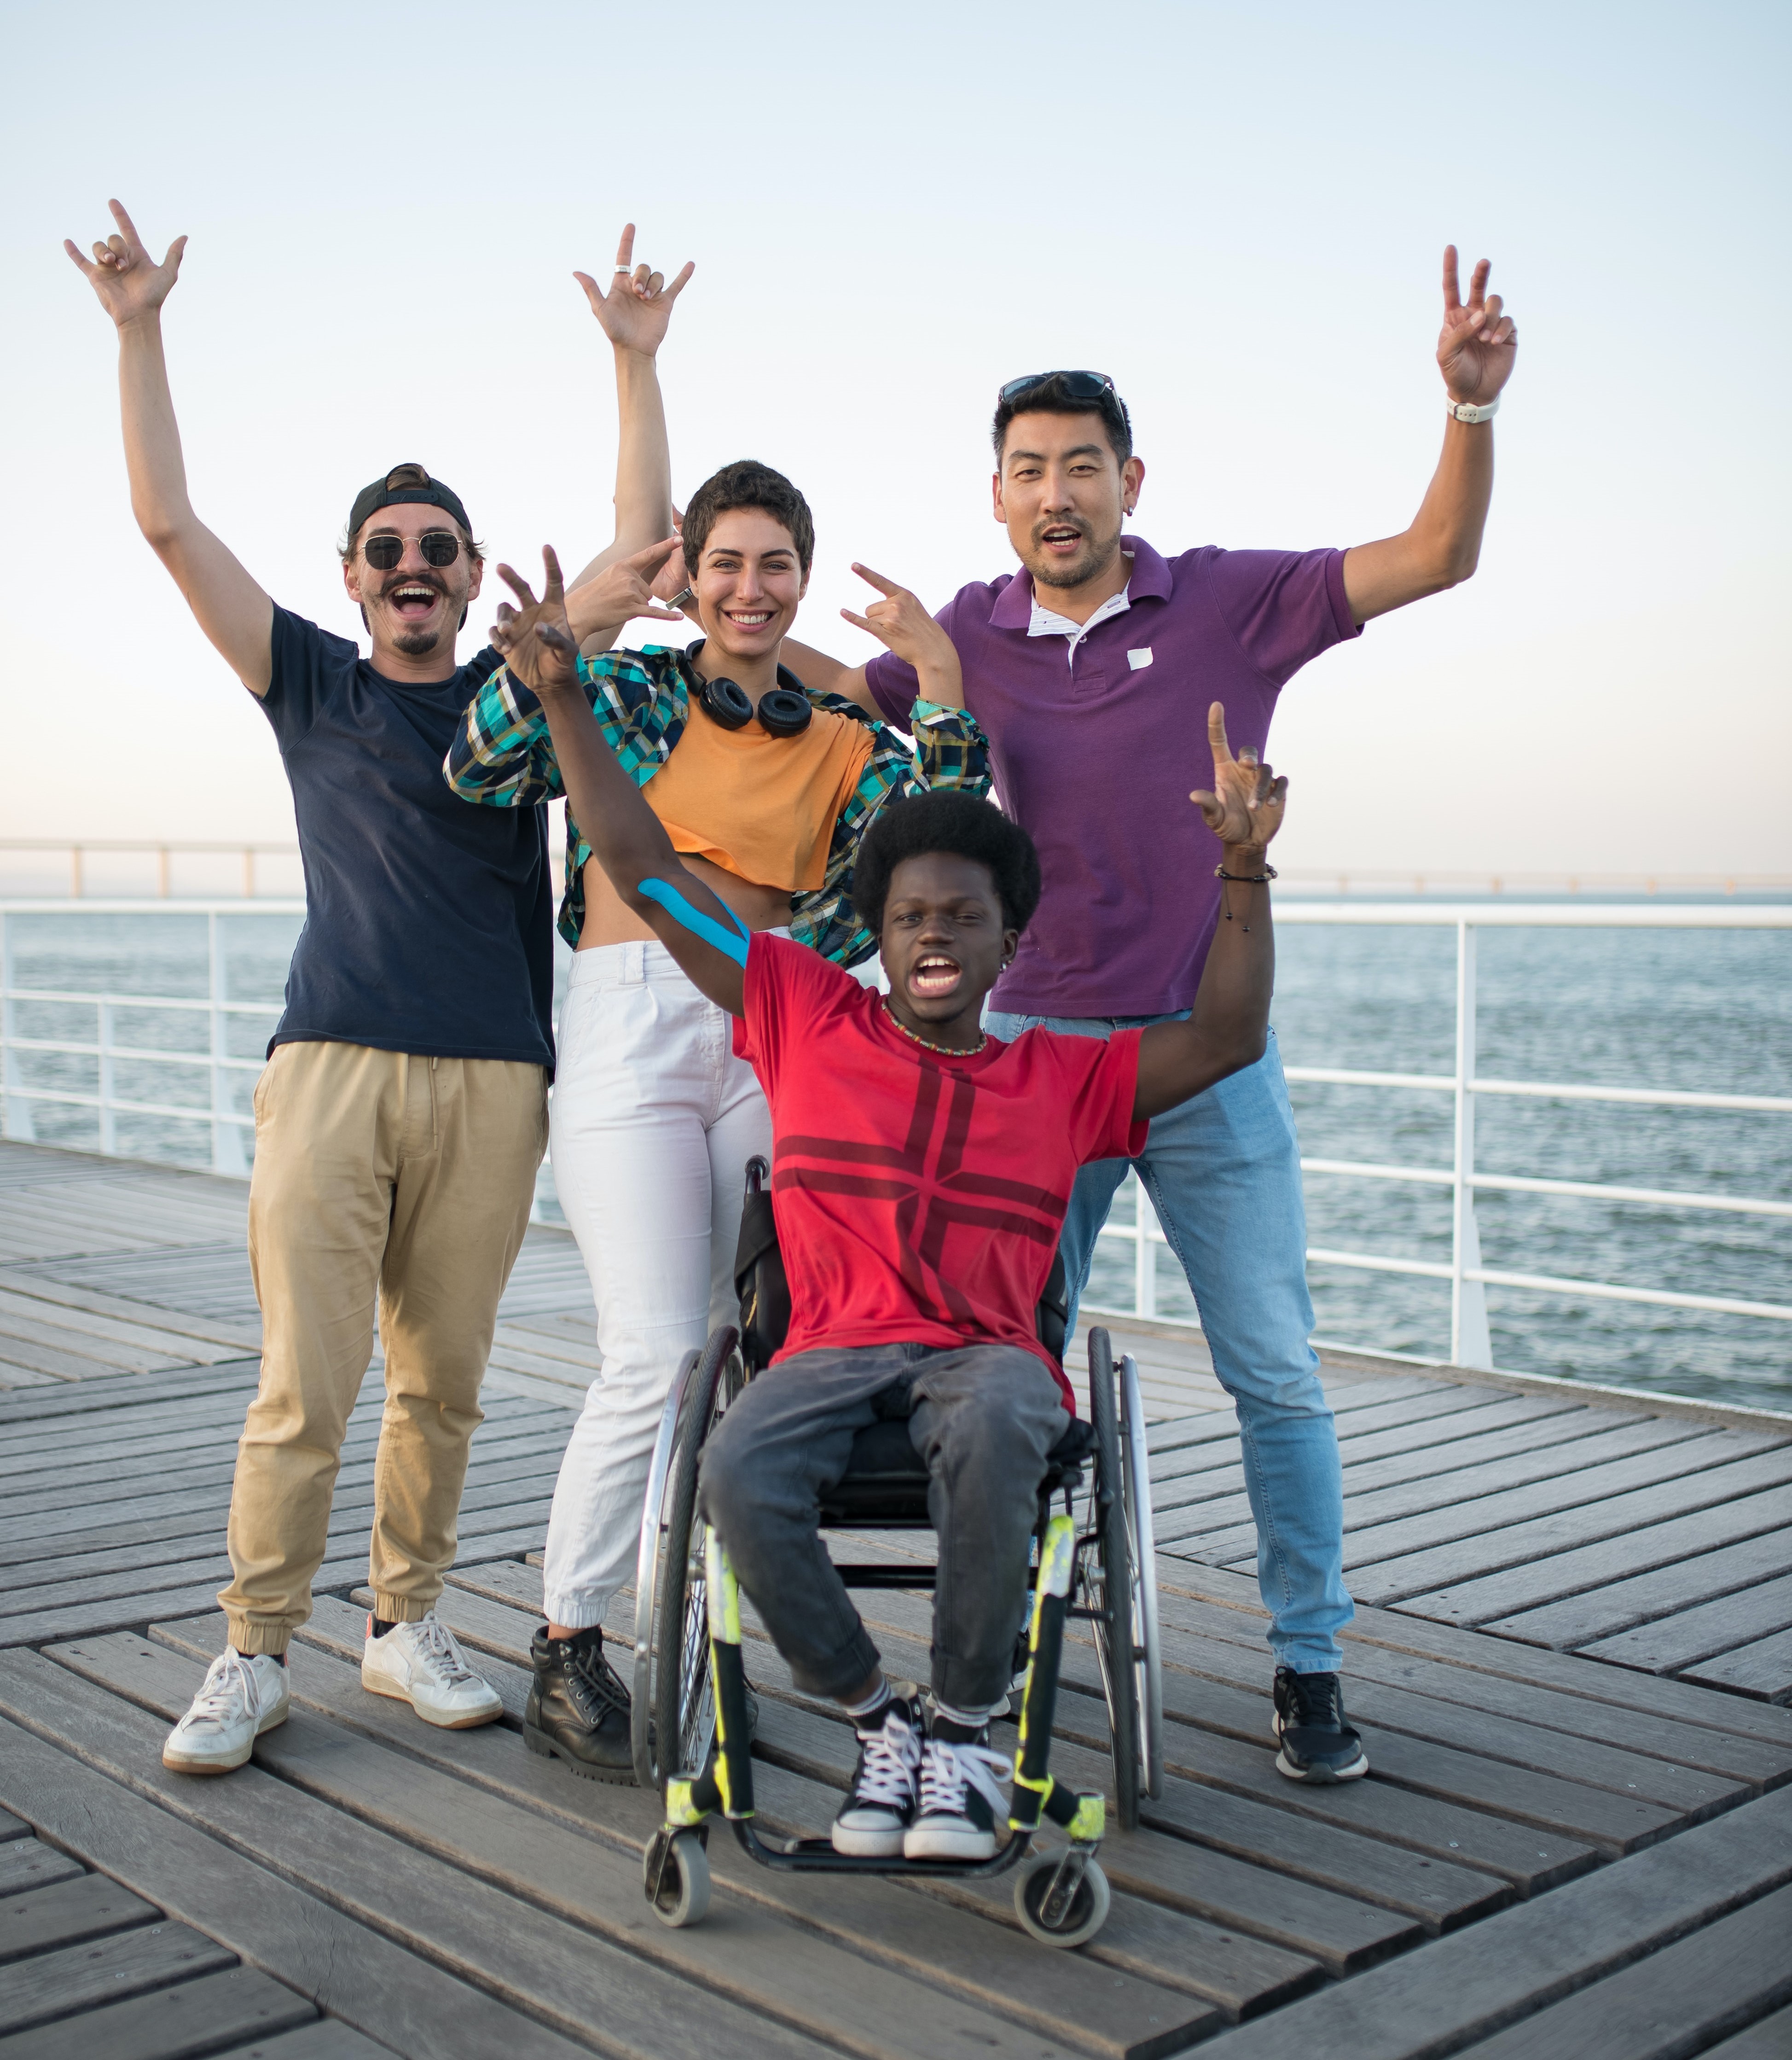 three young racially and gender diverse adults stand behind a black young adult on a beach boardwalk with their arms raised.